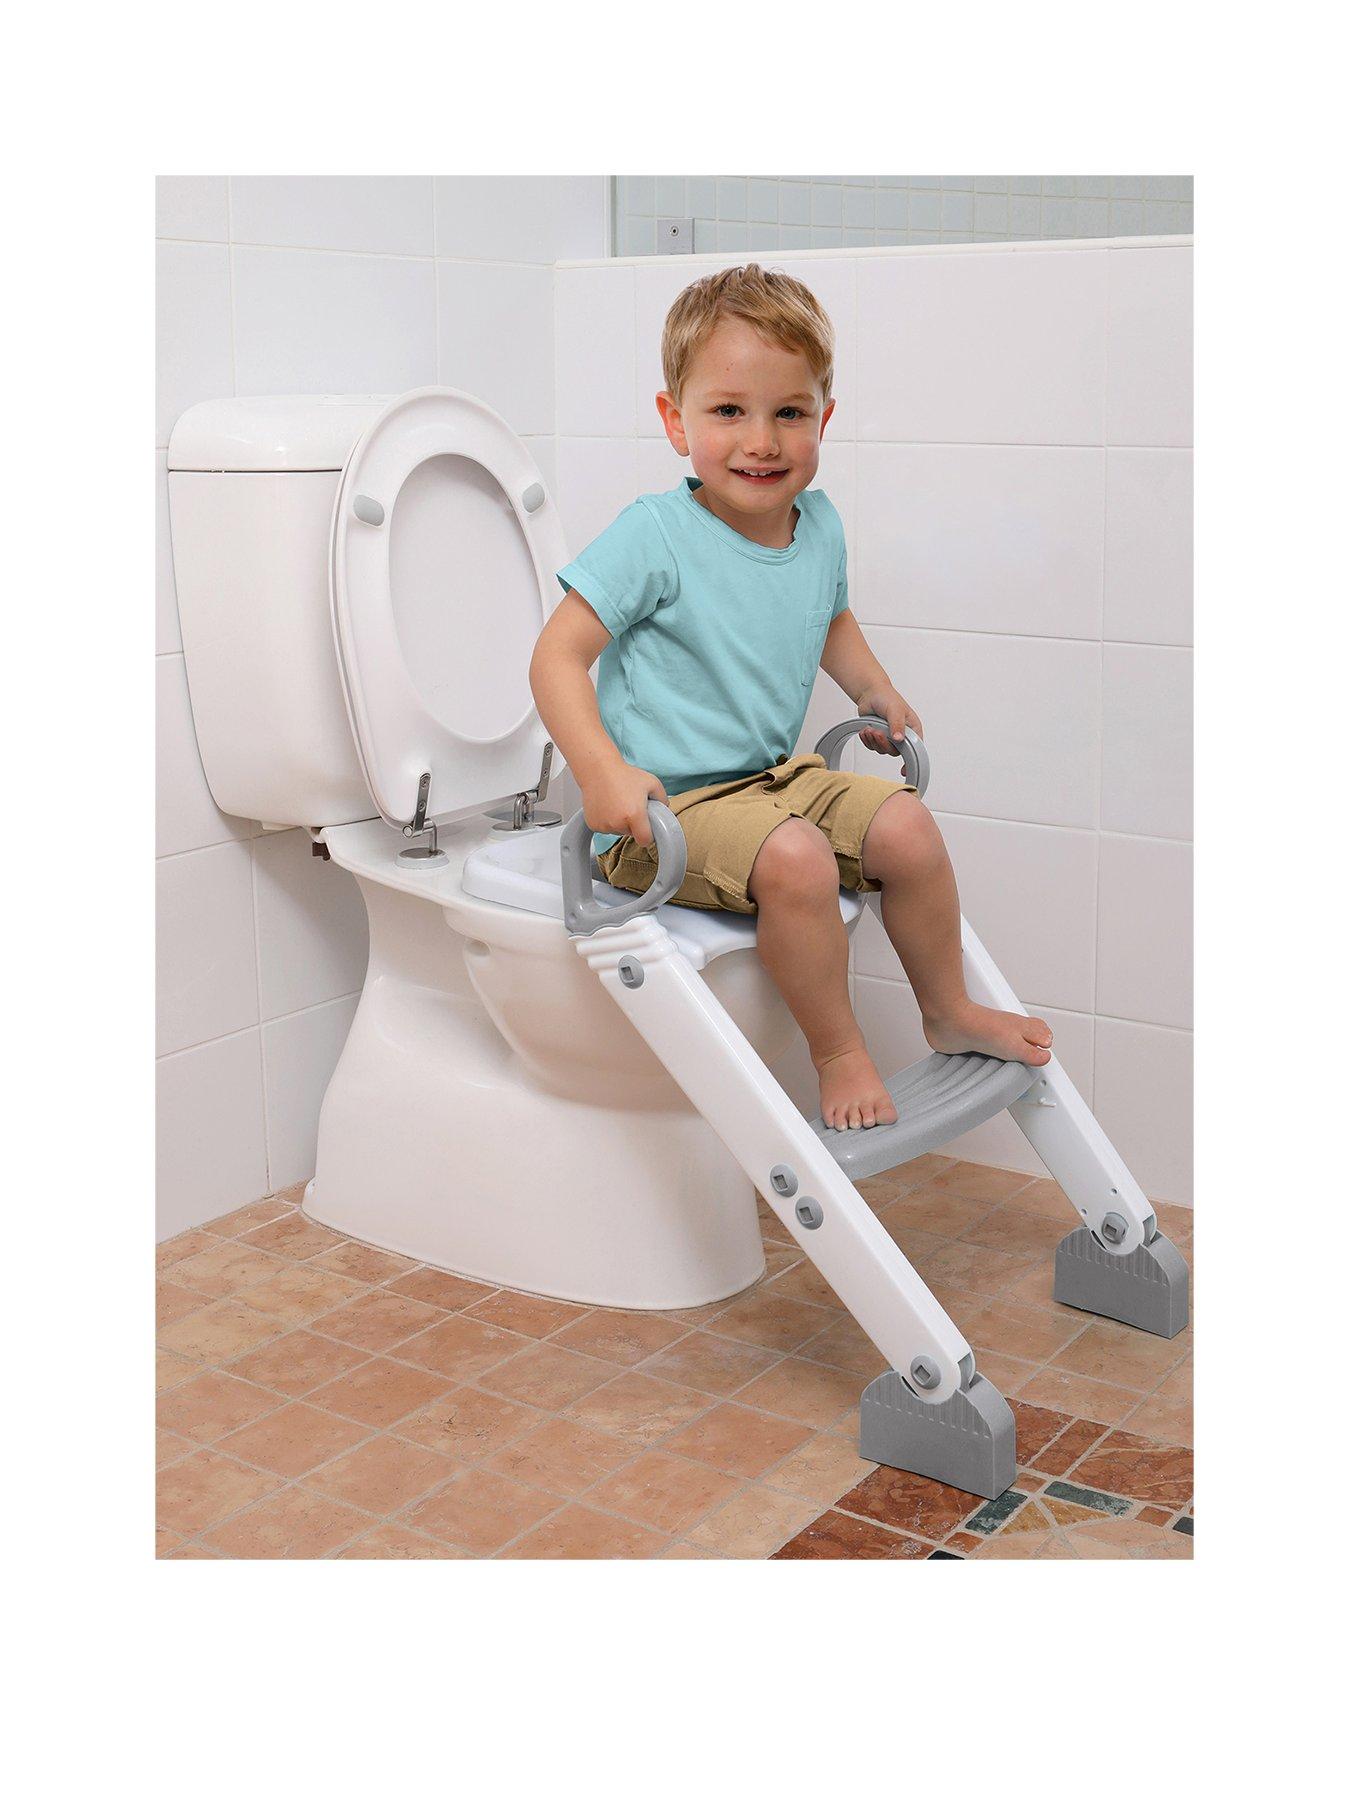 Stool Potty Training Toilet Seat with Non-Slip Ladder Color : Blue Baby Toddler Kid Toilet Trainer Potty Chair Trainer with Step Stool Ladder， for Boy and Girl 